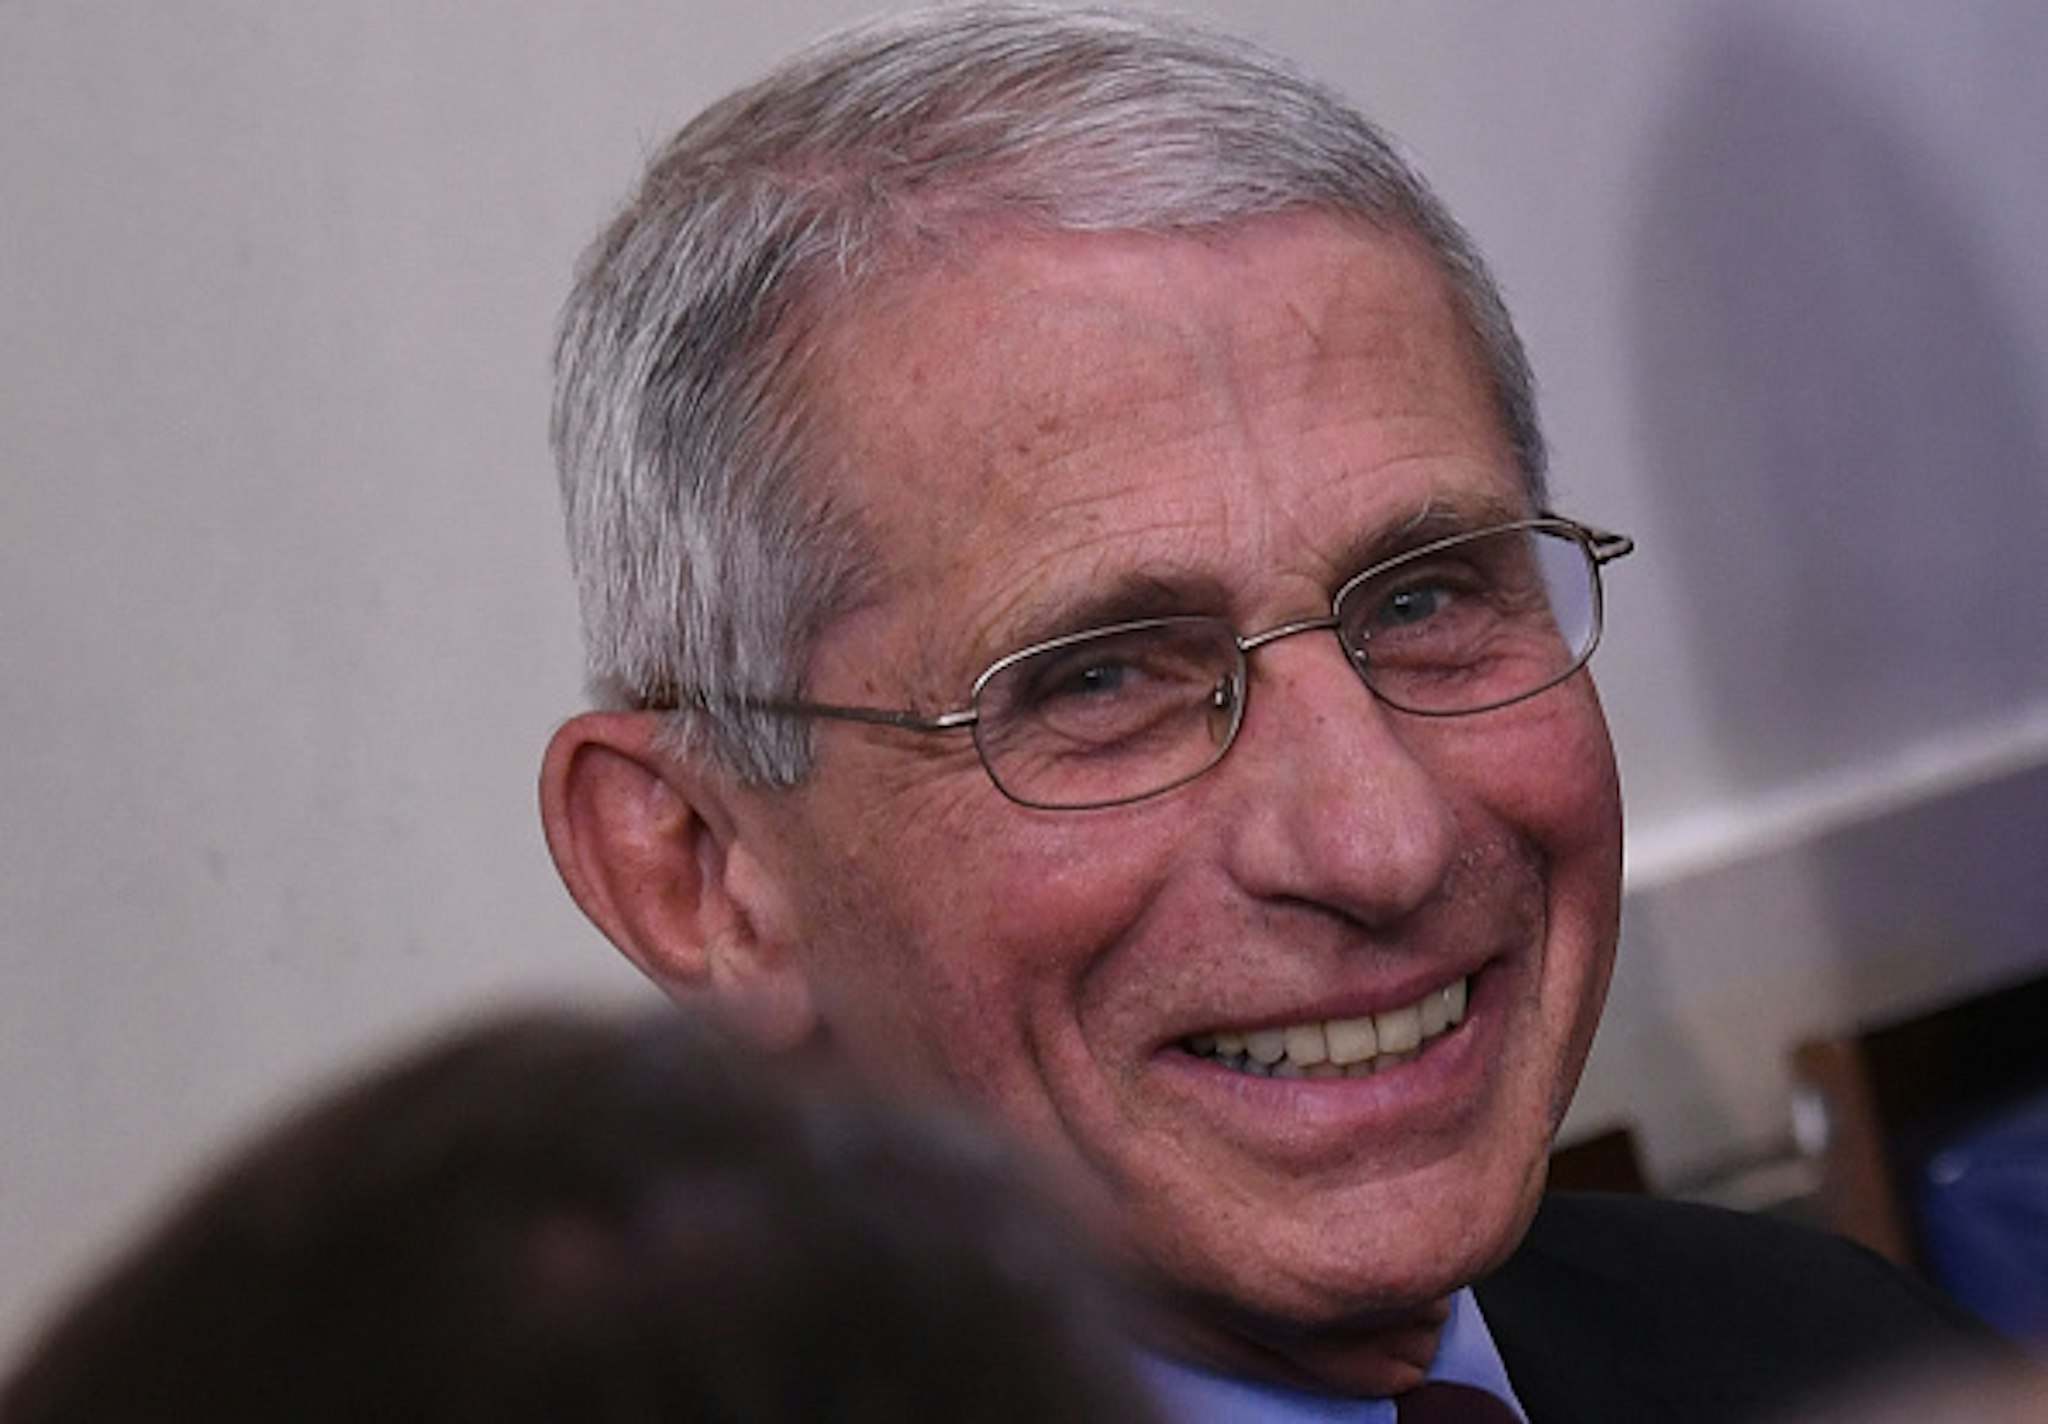 Director of the National Institute of Allergy and Infectious Diseases Anthony Fauci smiles as he listens to US President Donald Trump speak during an unscheduled briefing after a Coronavirus Task Force meeting at the White House on April 5, 2020, in Washington, DC.